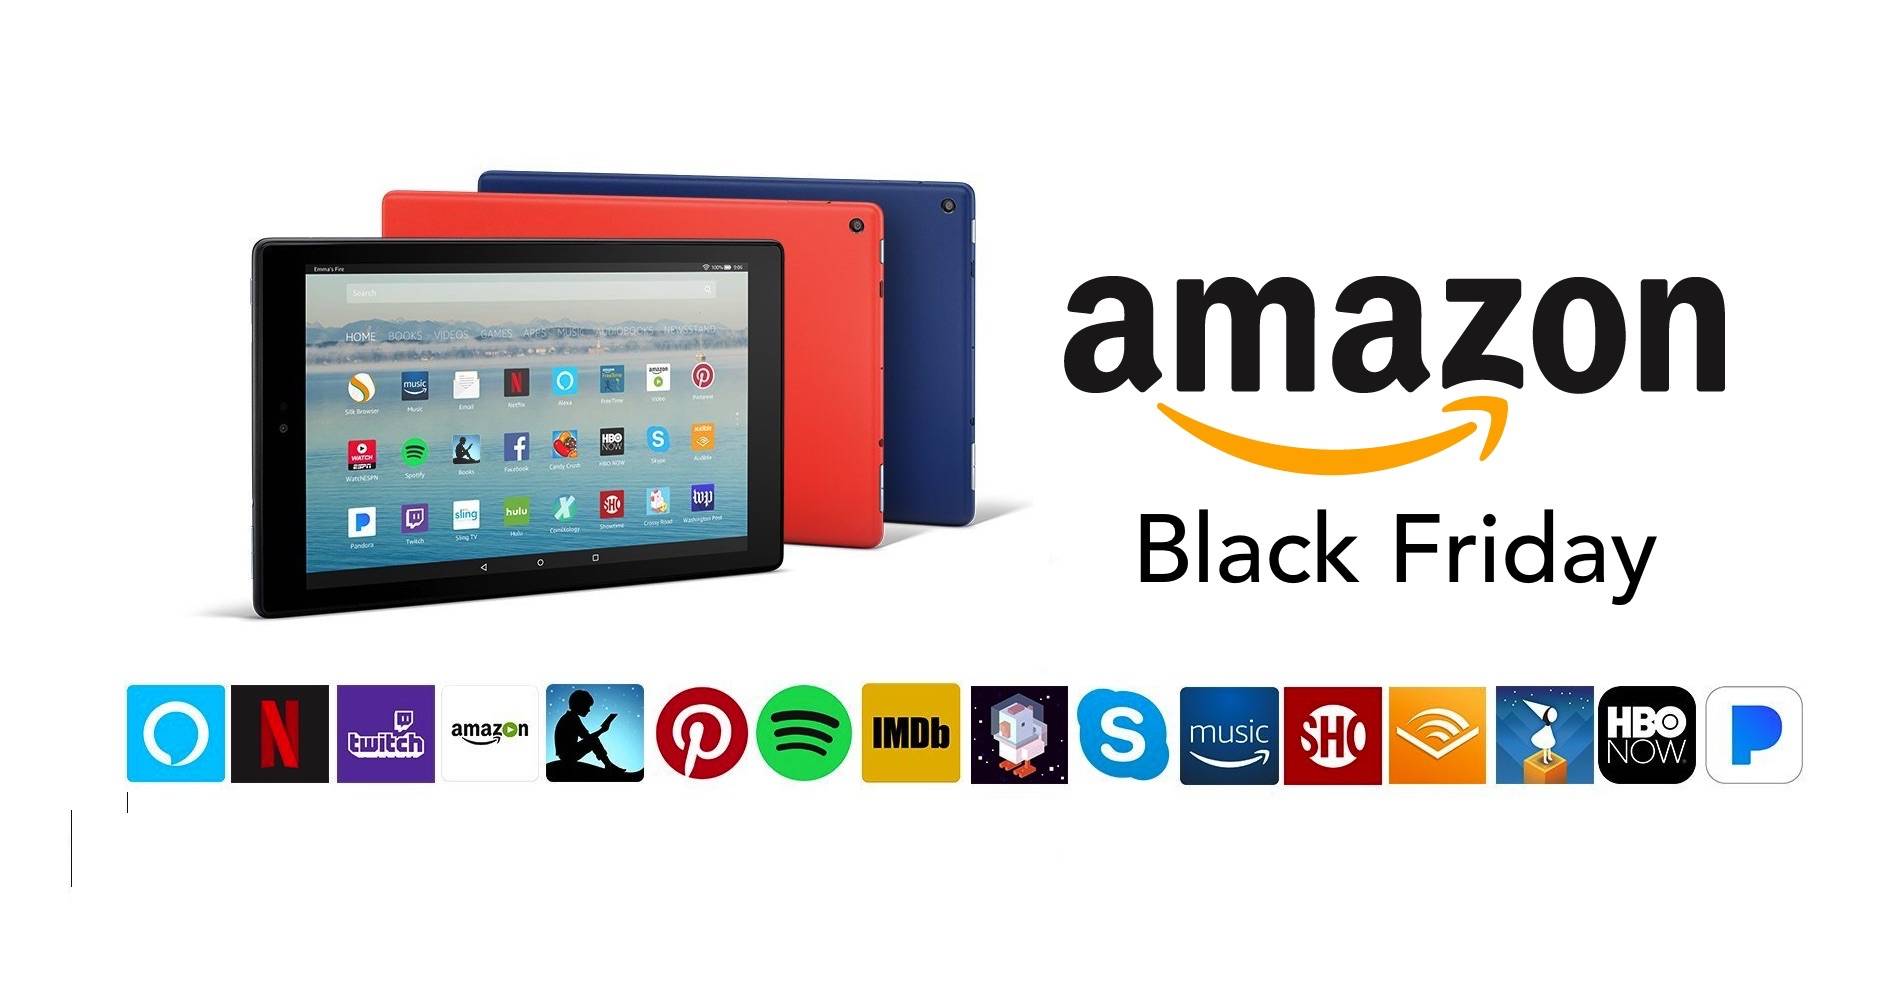 Amazon starts Black Friday with three Fire tablets on sale - Android Community